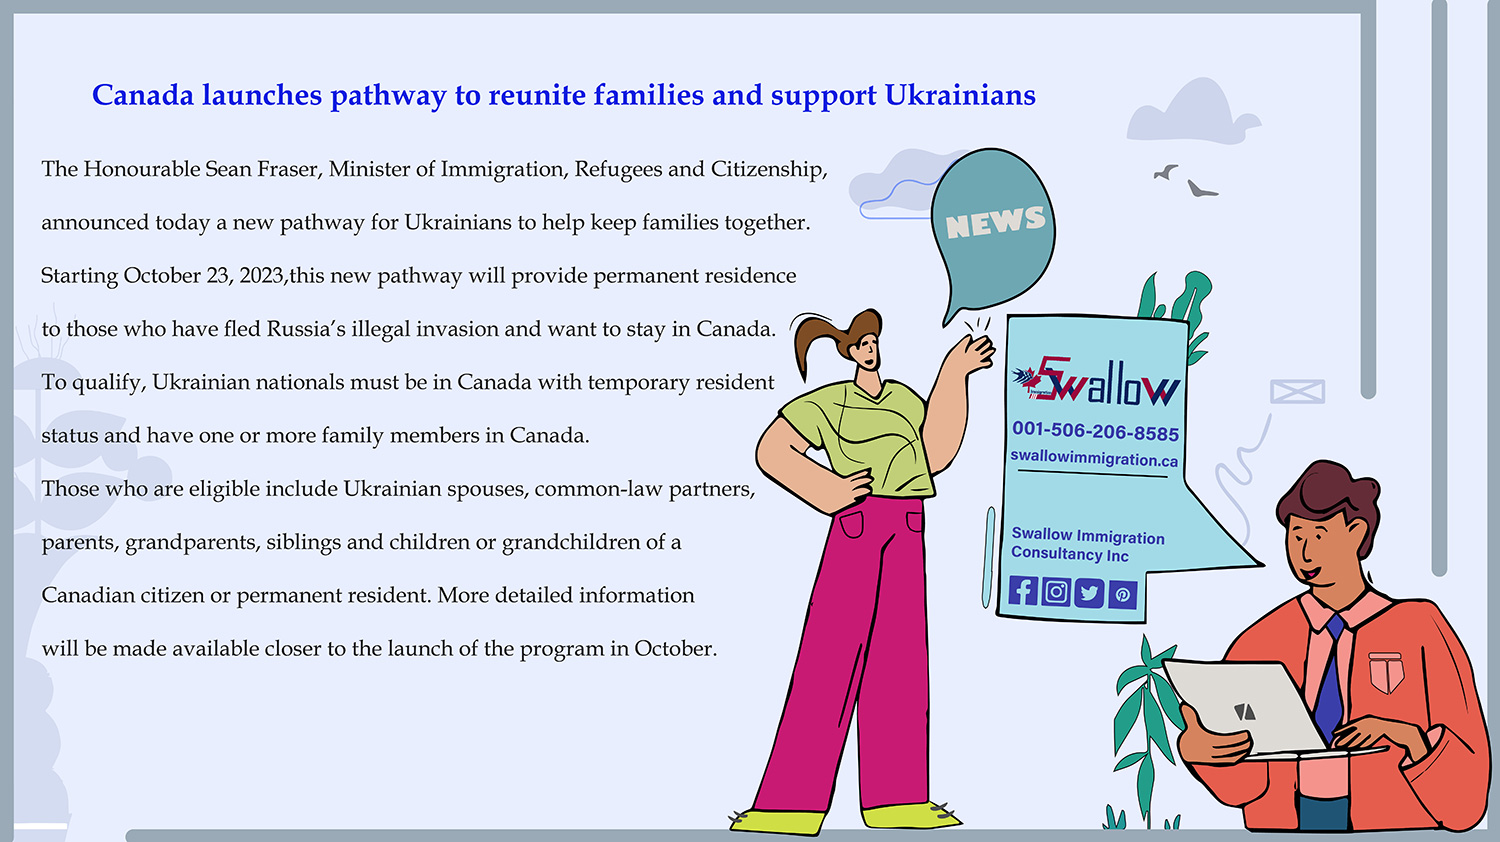 Canada launches pathway to reunite families and support Ukrainians